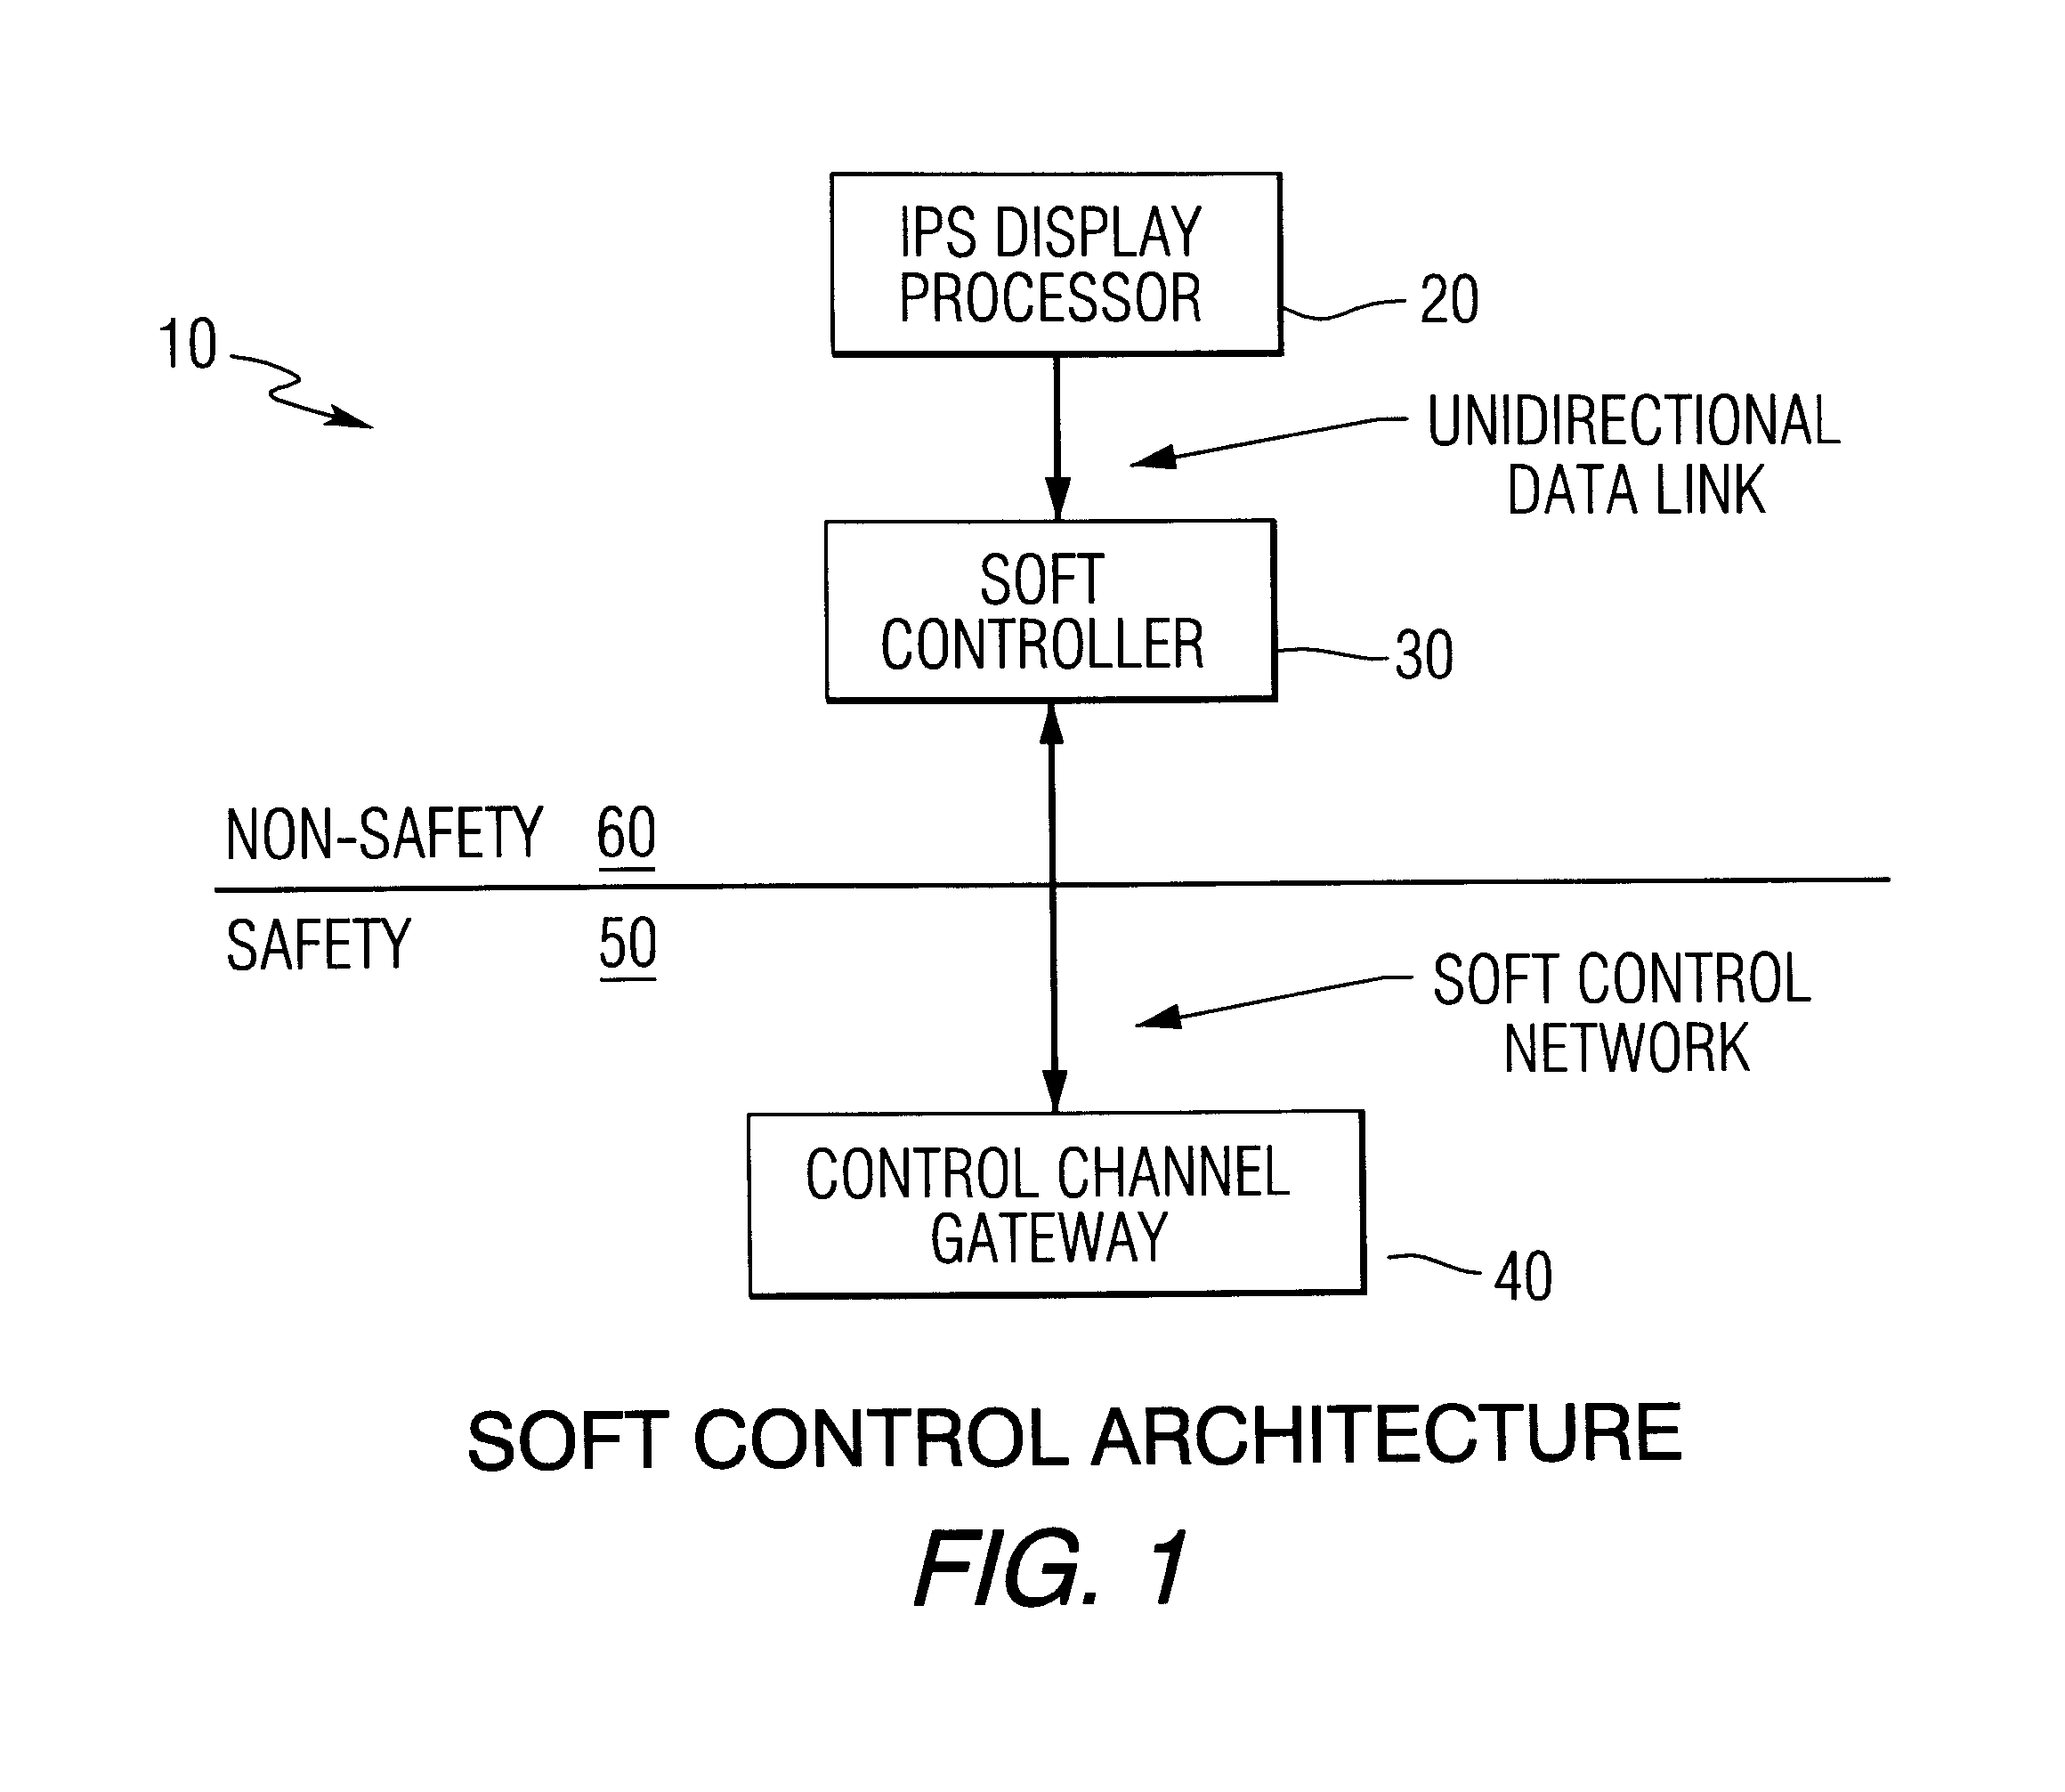 Method and apparatus to eliminate confirmation switches and channel demultiplexer from soft control man-machine interface (MMI)